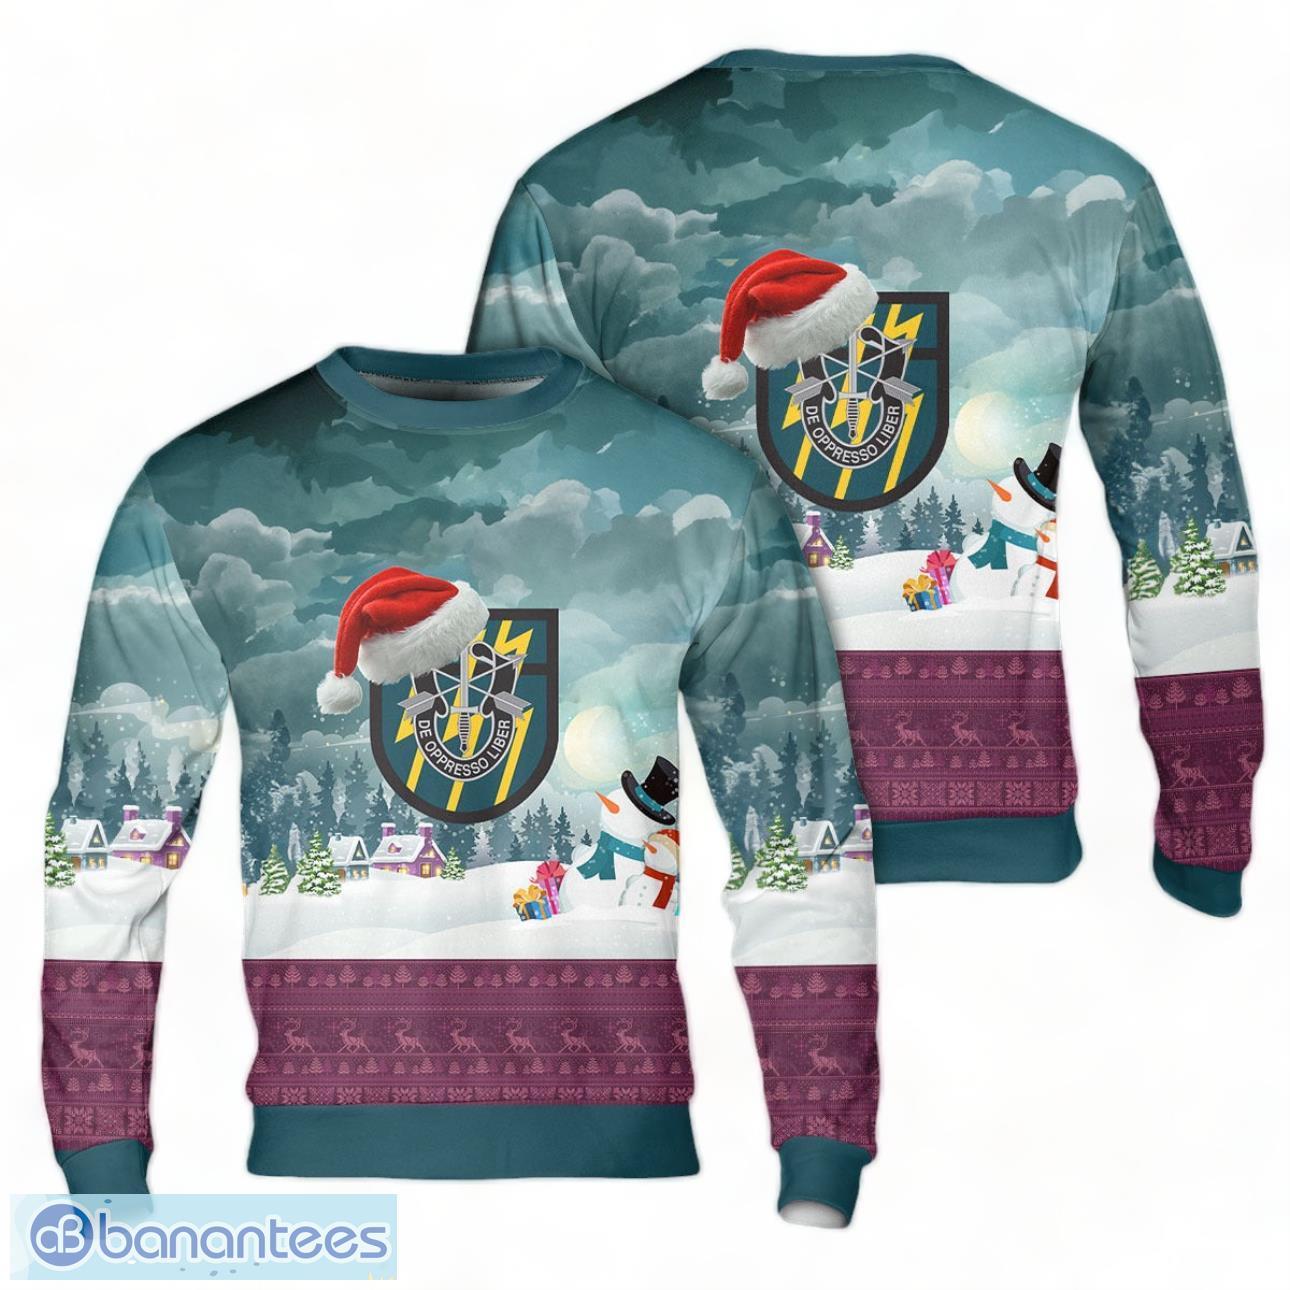 US Army 12th Special Forces Group (12th SFG) Christmas Sweater Product Photo 1